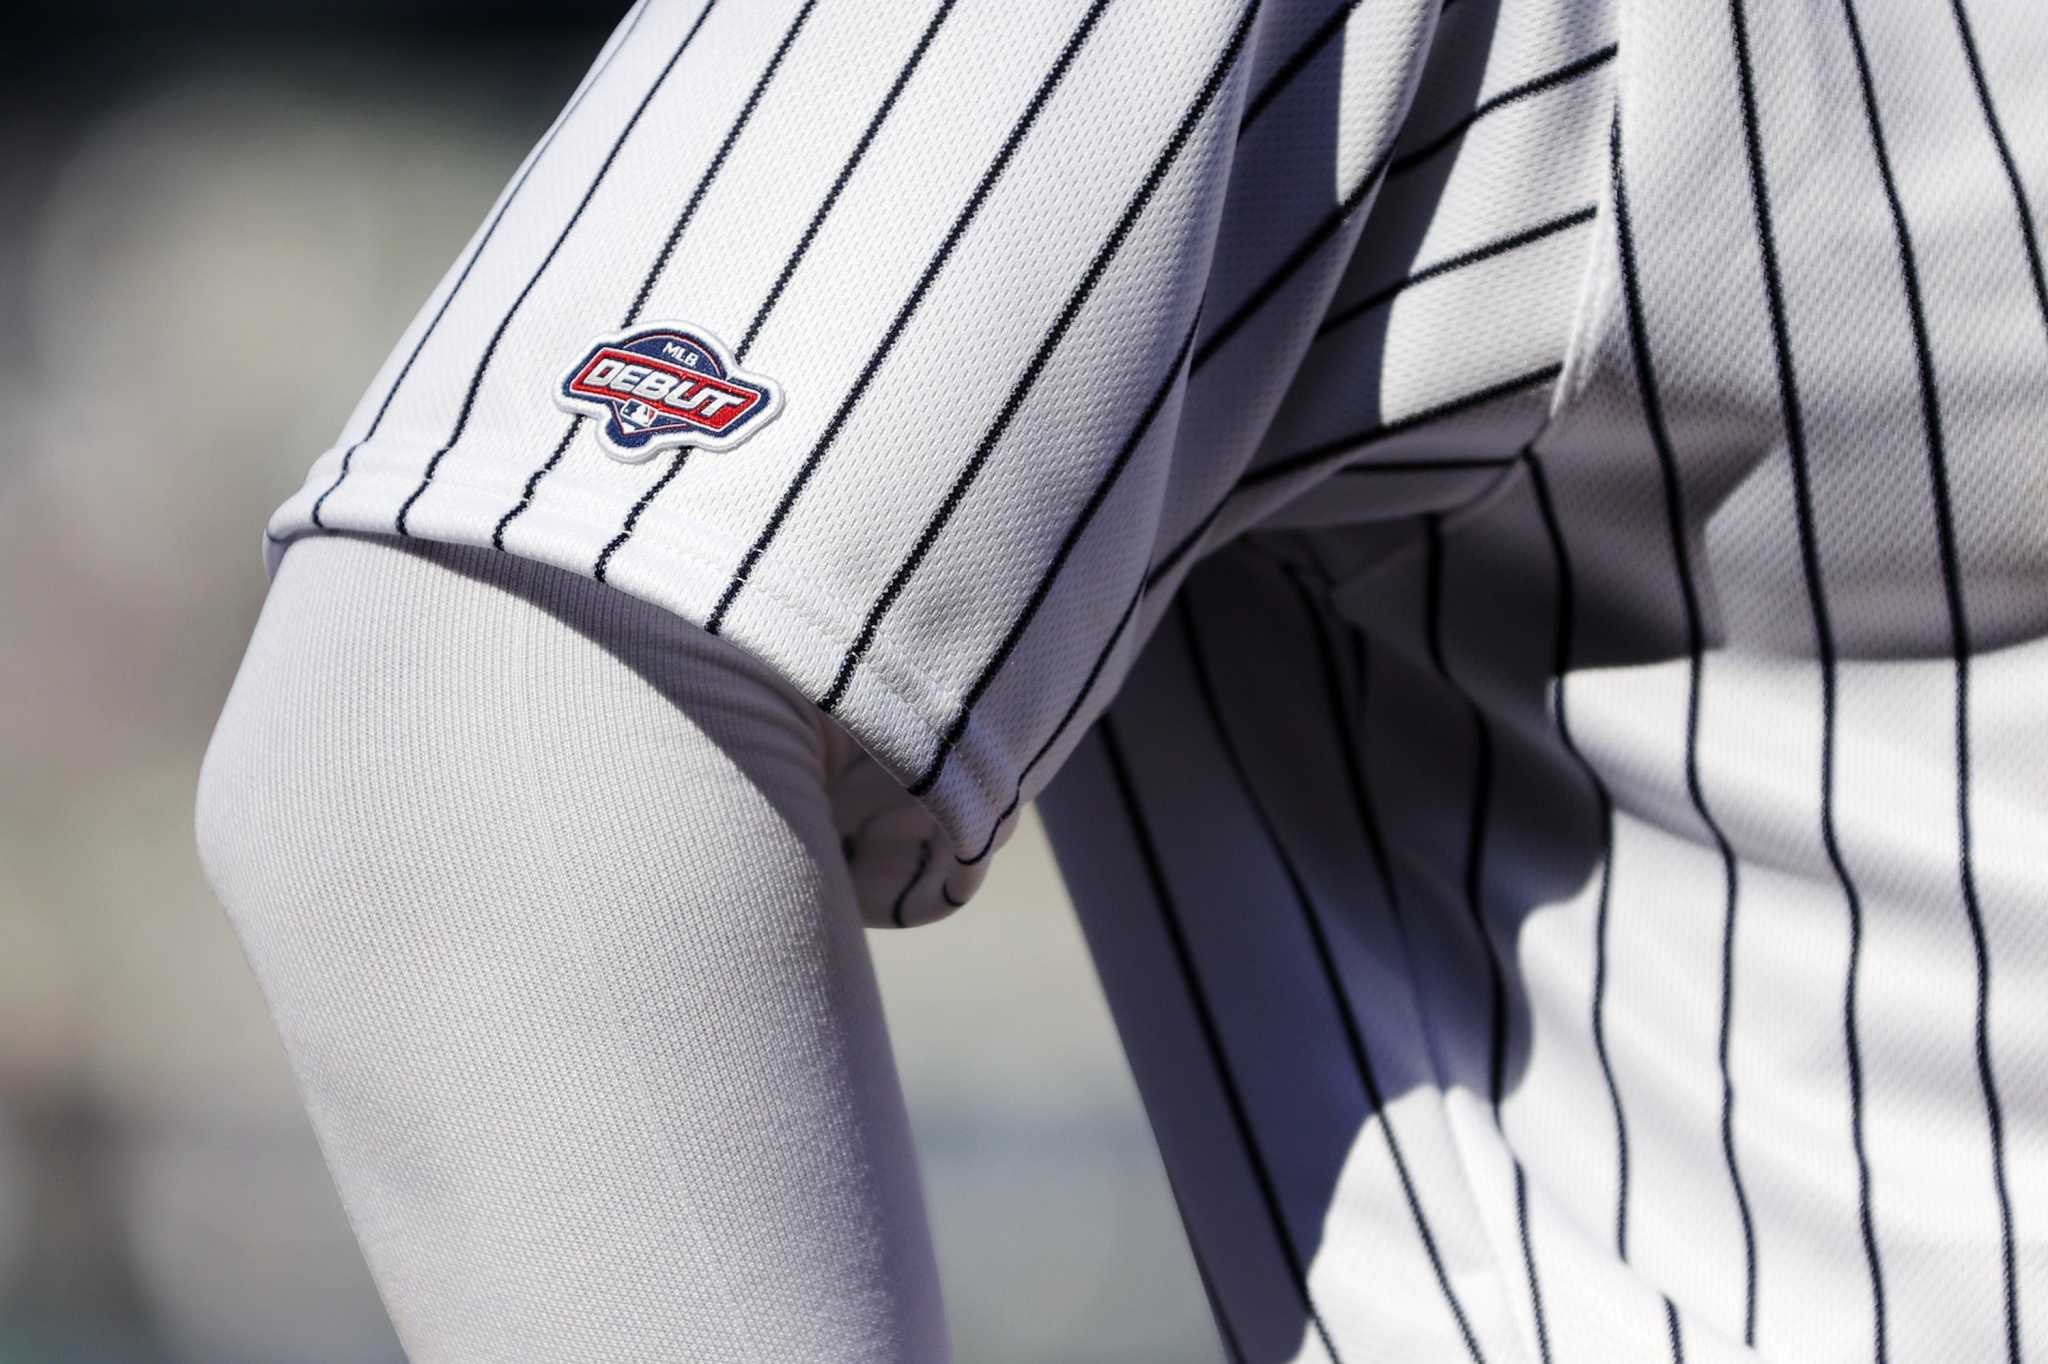 MLB likely to have ad patches when it comes back